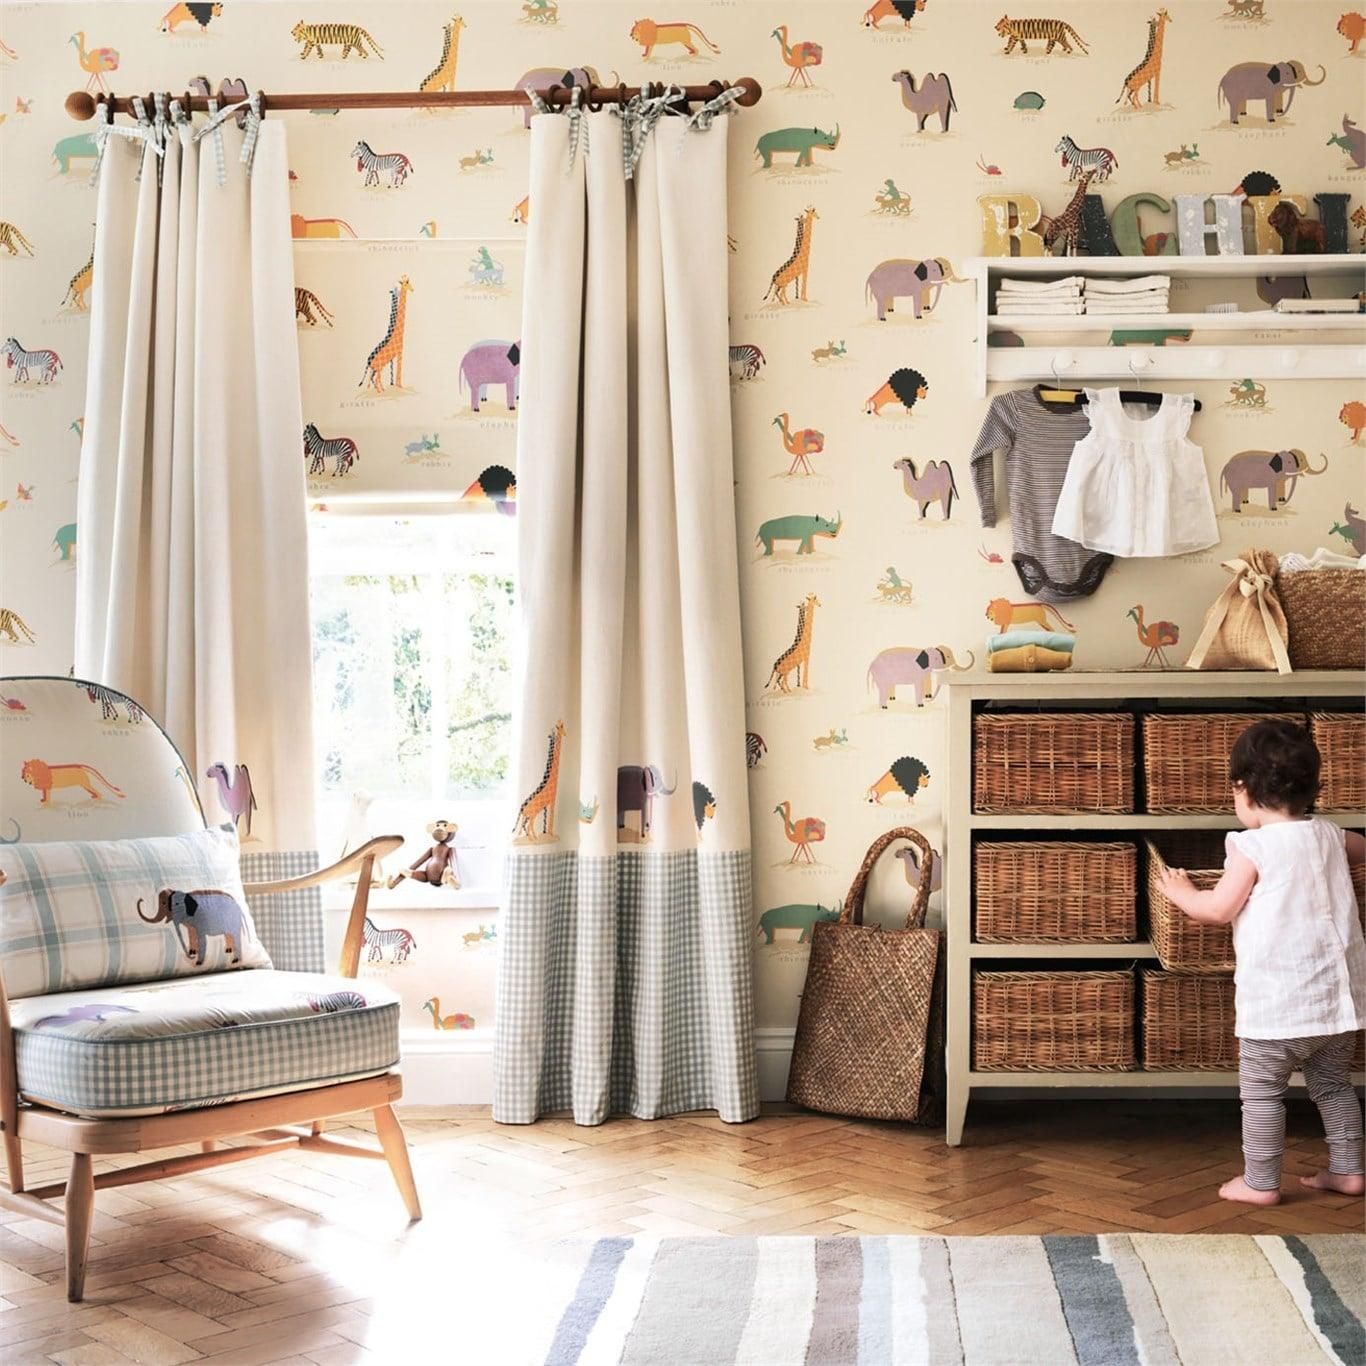 Colorful and Playful Drapery Options for Kids’ Rooms